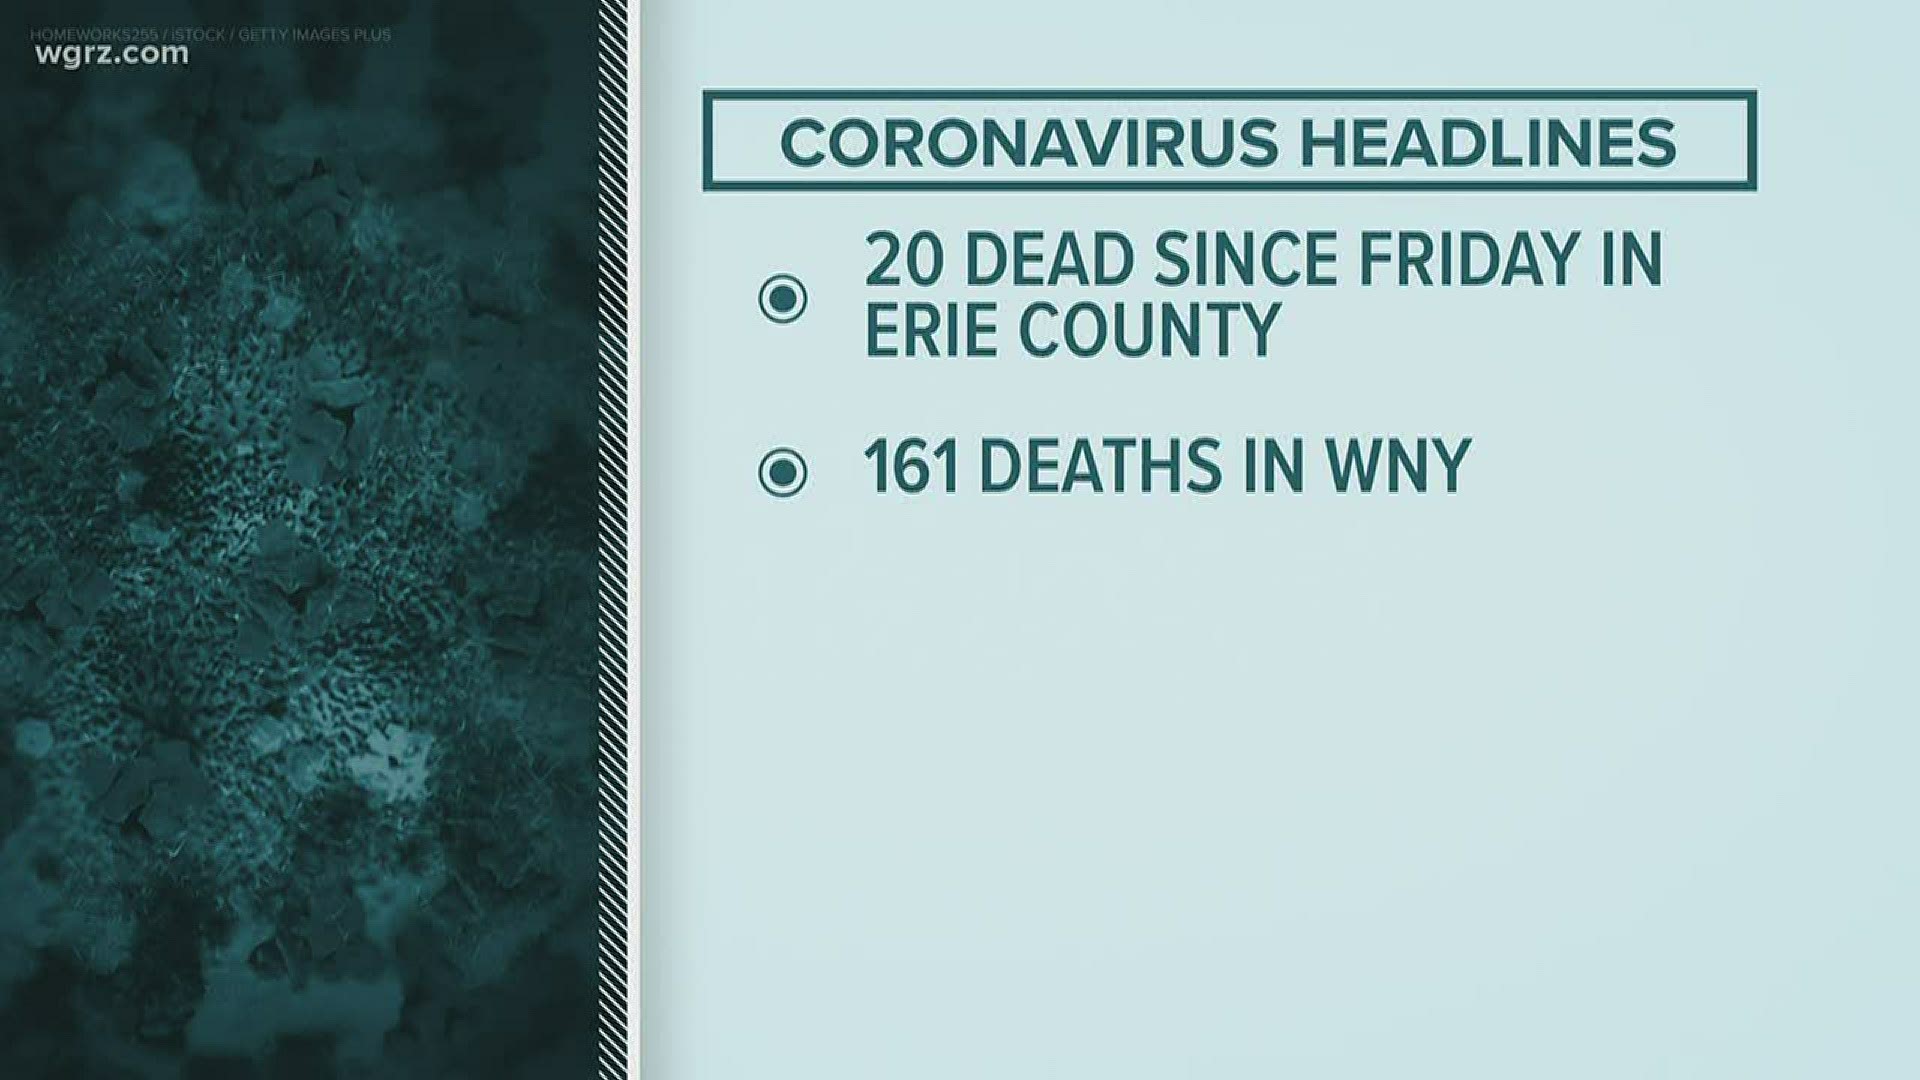 Across the state, more than 500 people died in just the last 24 hours. That's a lot, but it's also the lowest daily total in two weeks.